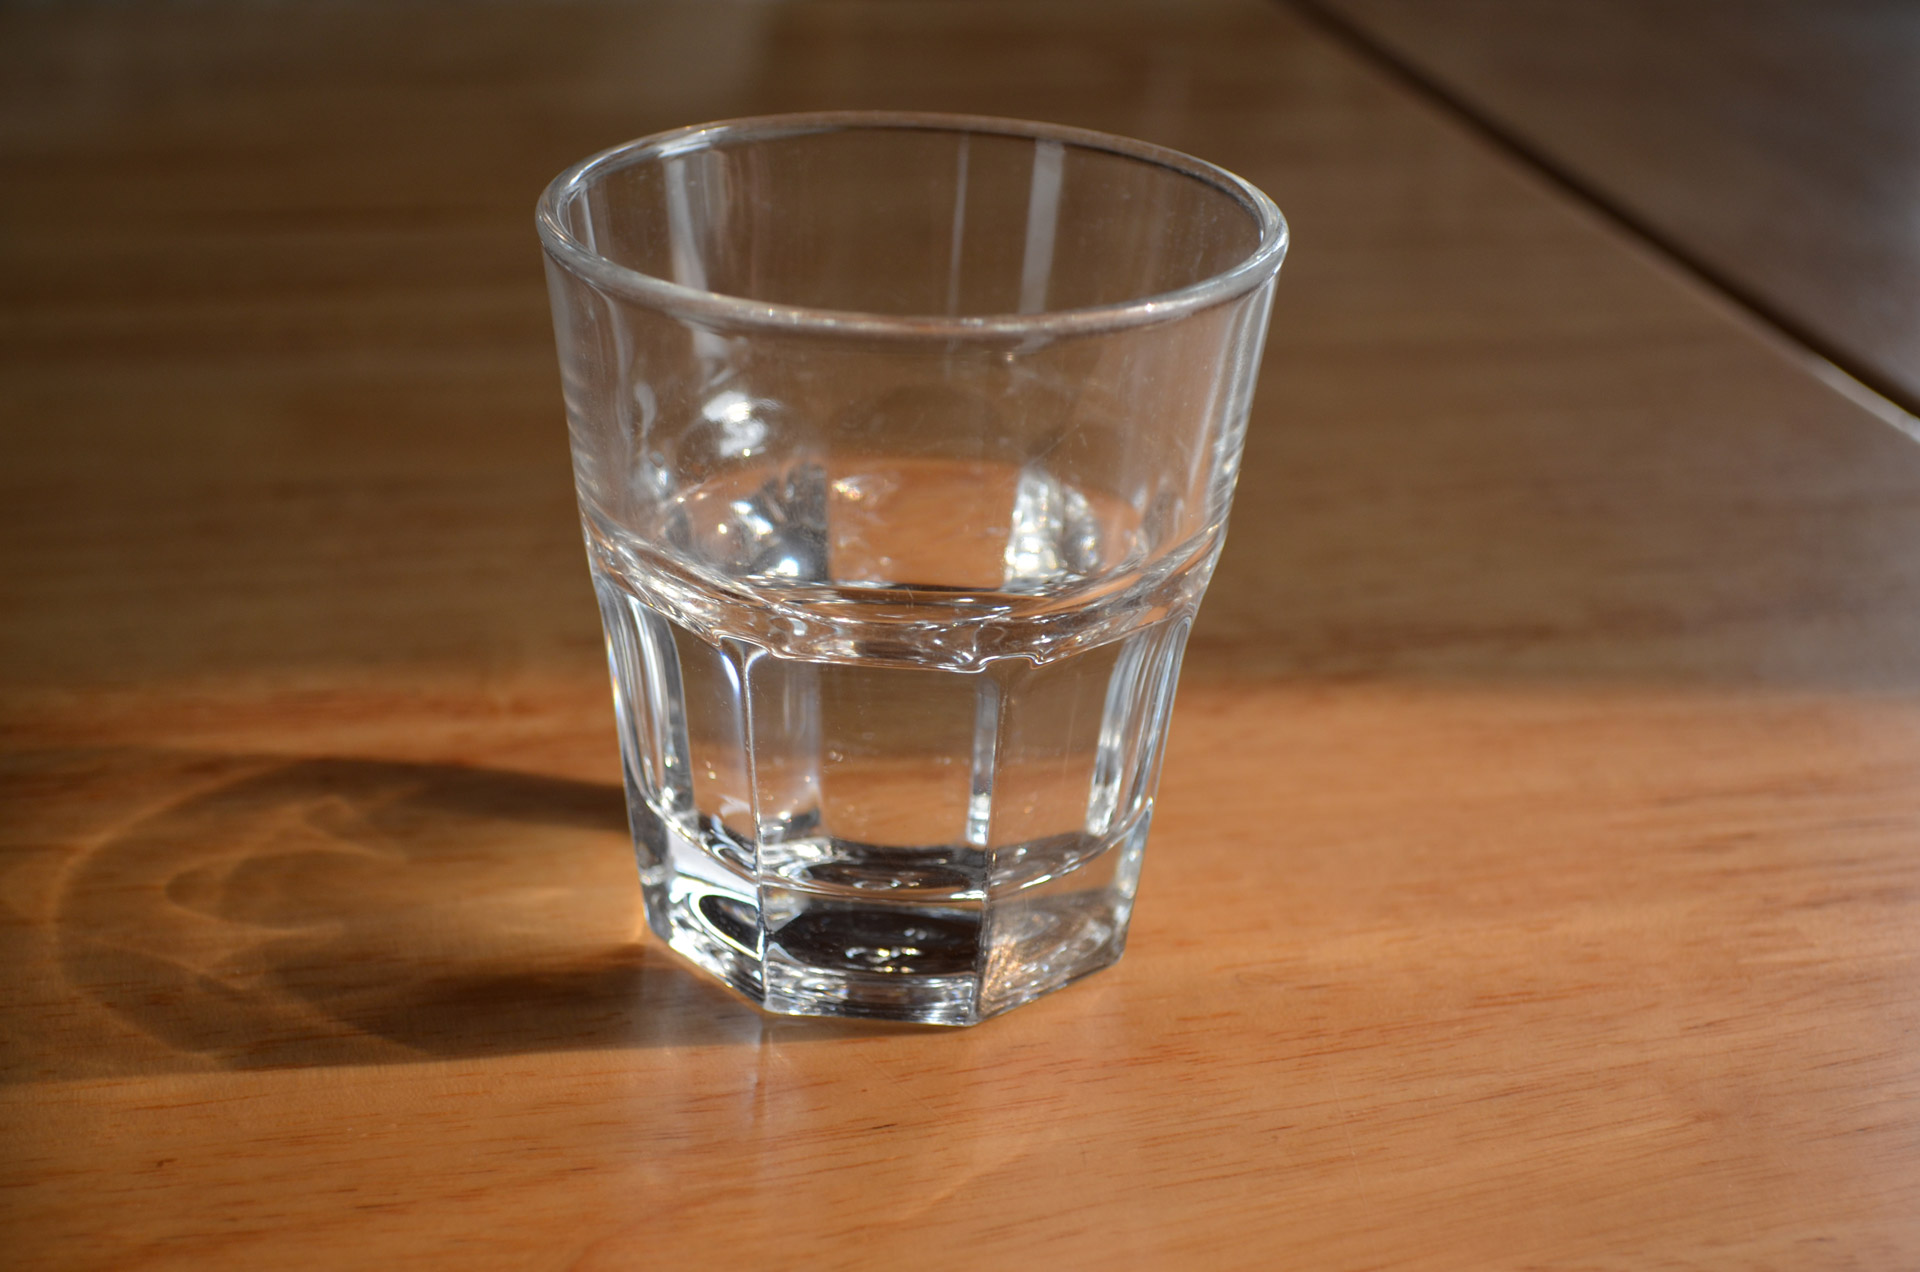 Glass with water in it